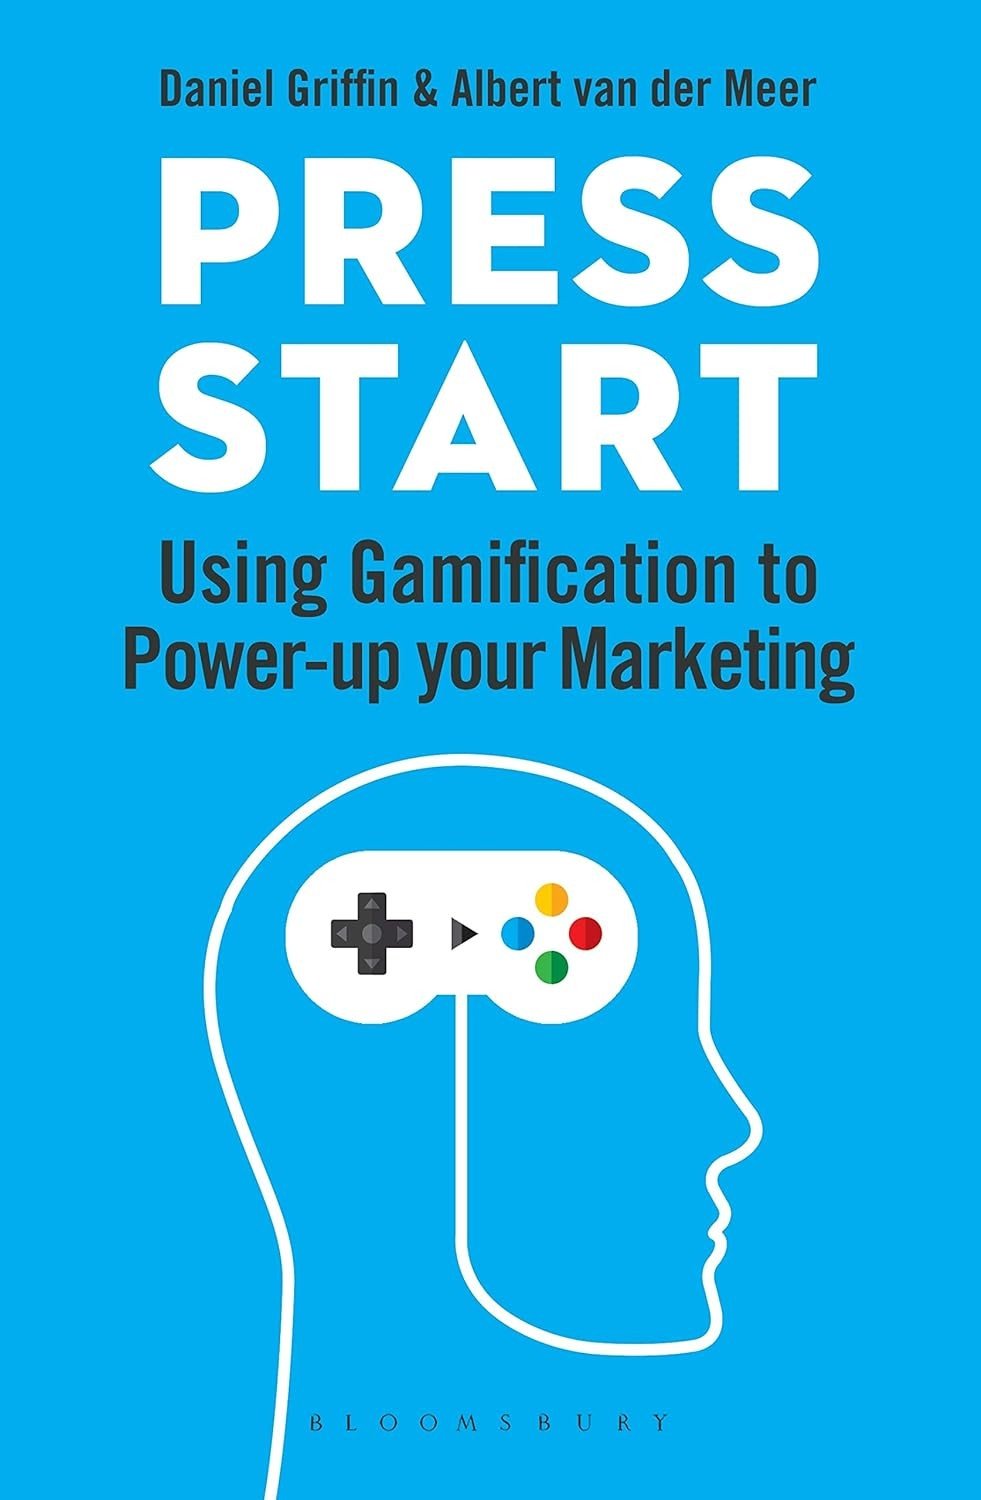 Press start _ Gamification for a successful email marketing strategy